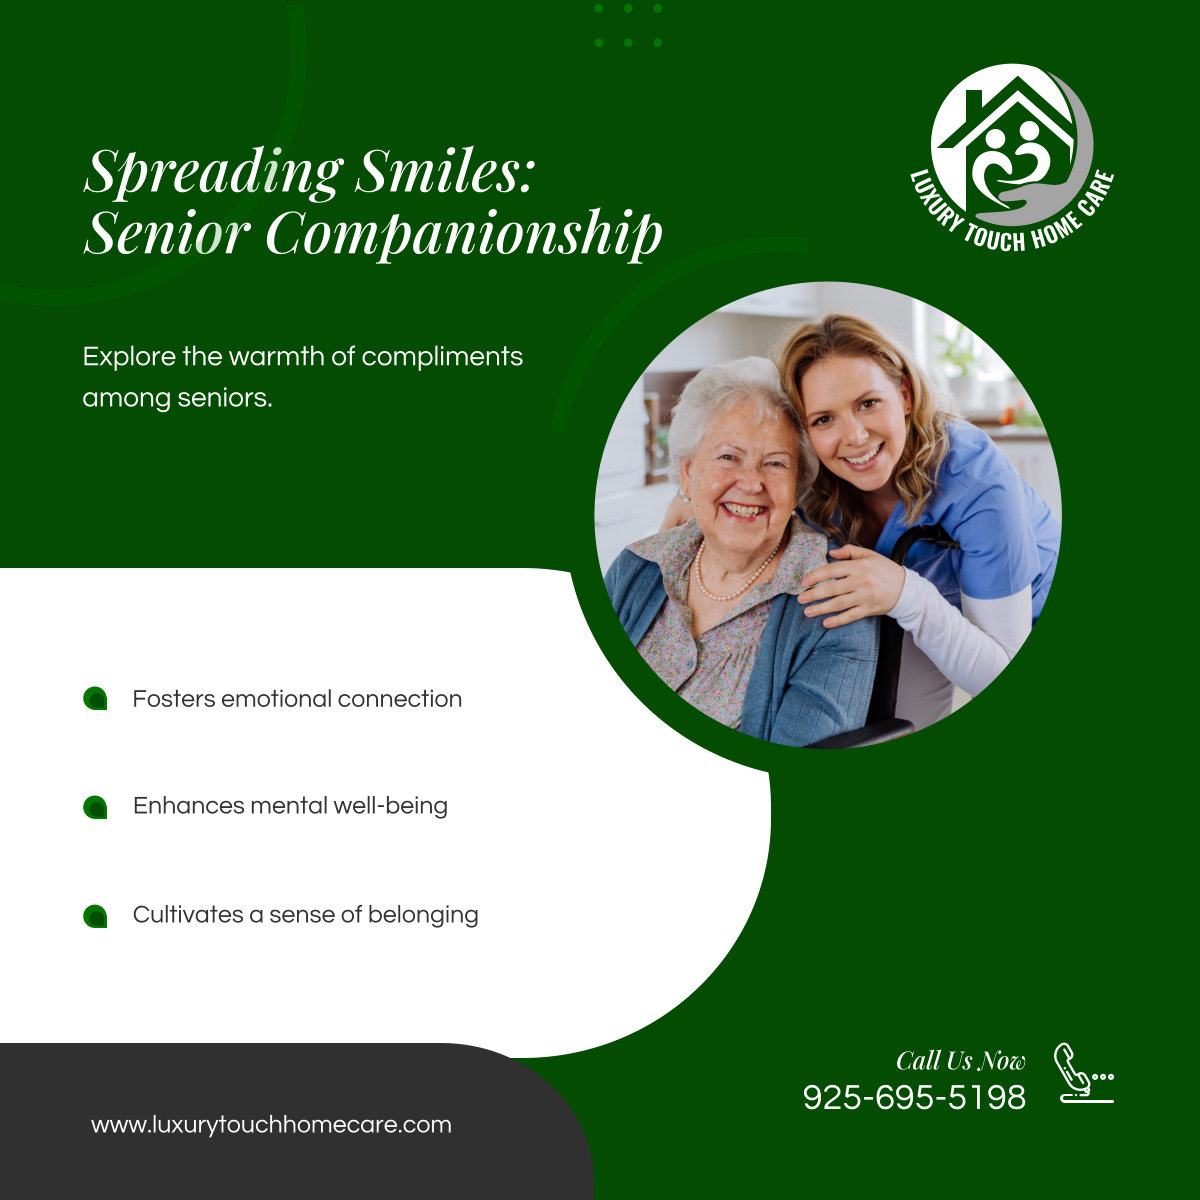 Celebrate the power of warm companionship among seniors. Spread kindness and positivity for a brighter tomorrow!
 
#SeniorCompanionship #WaterfordCA #HomeCareServices